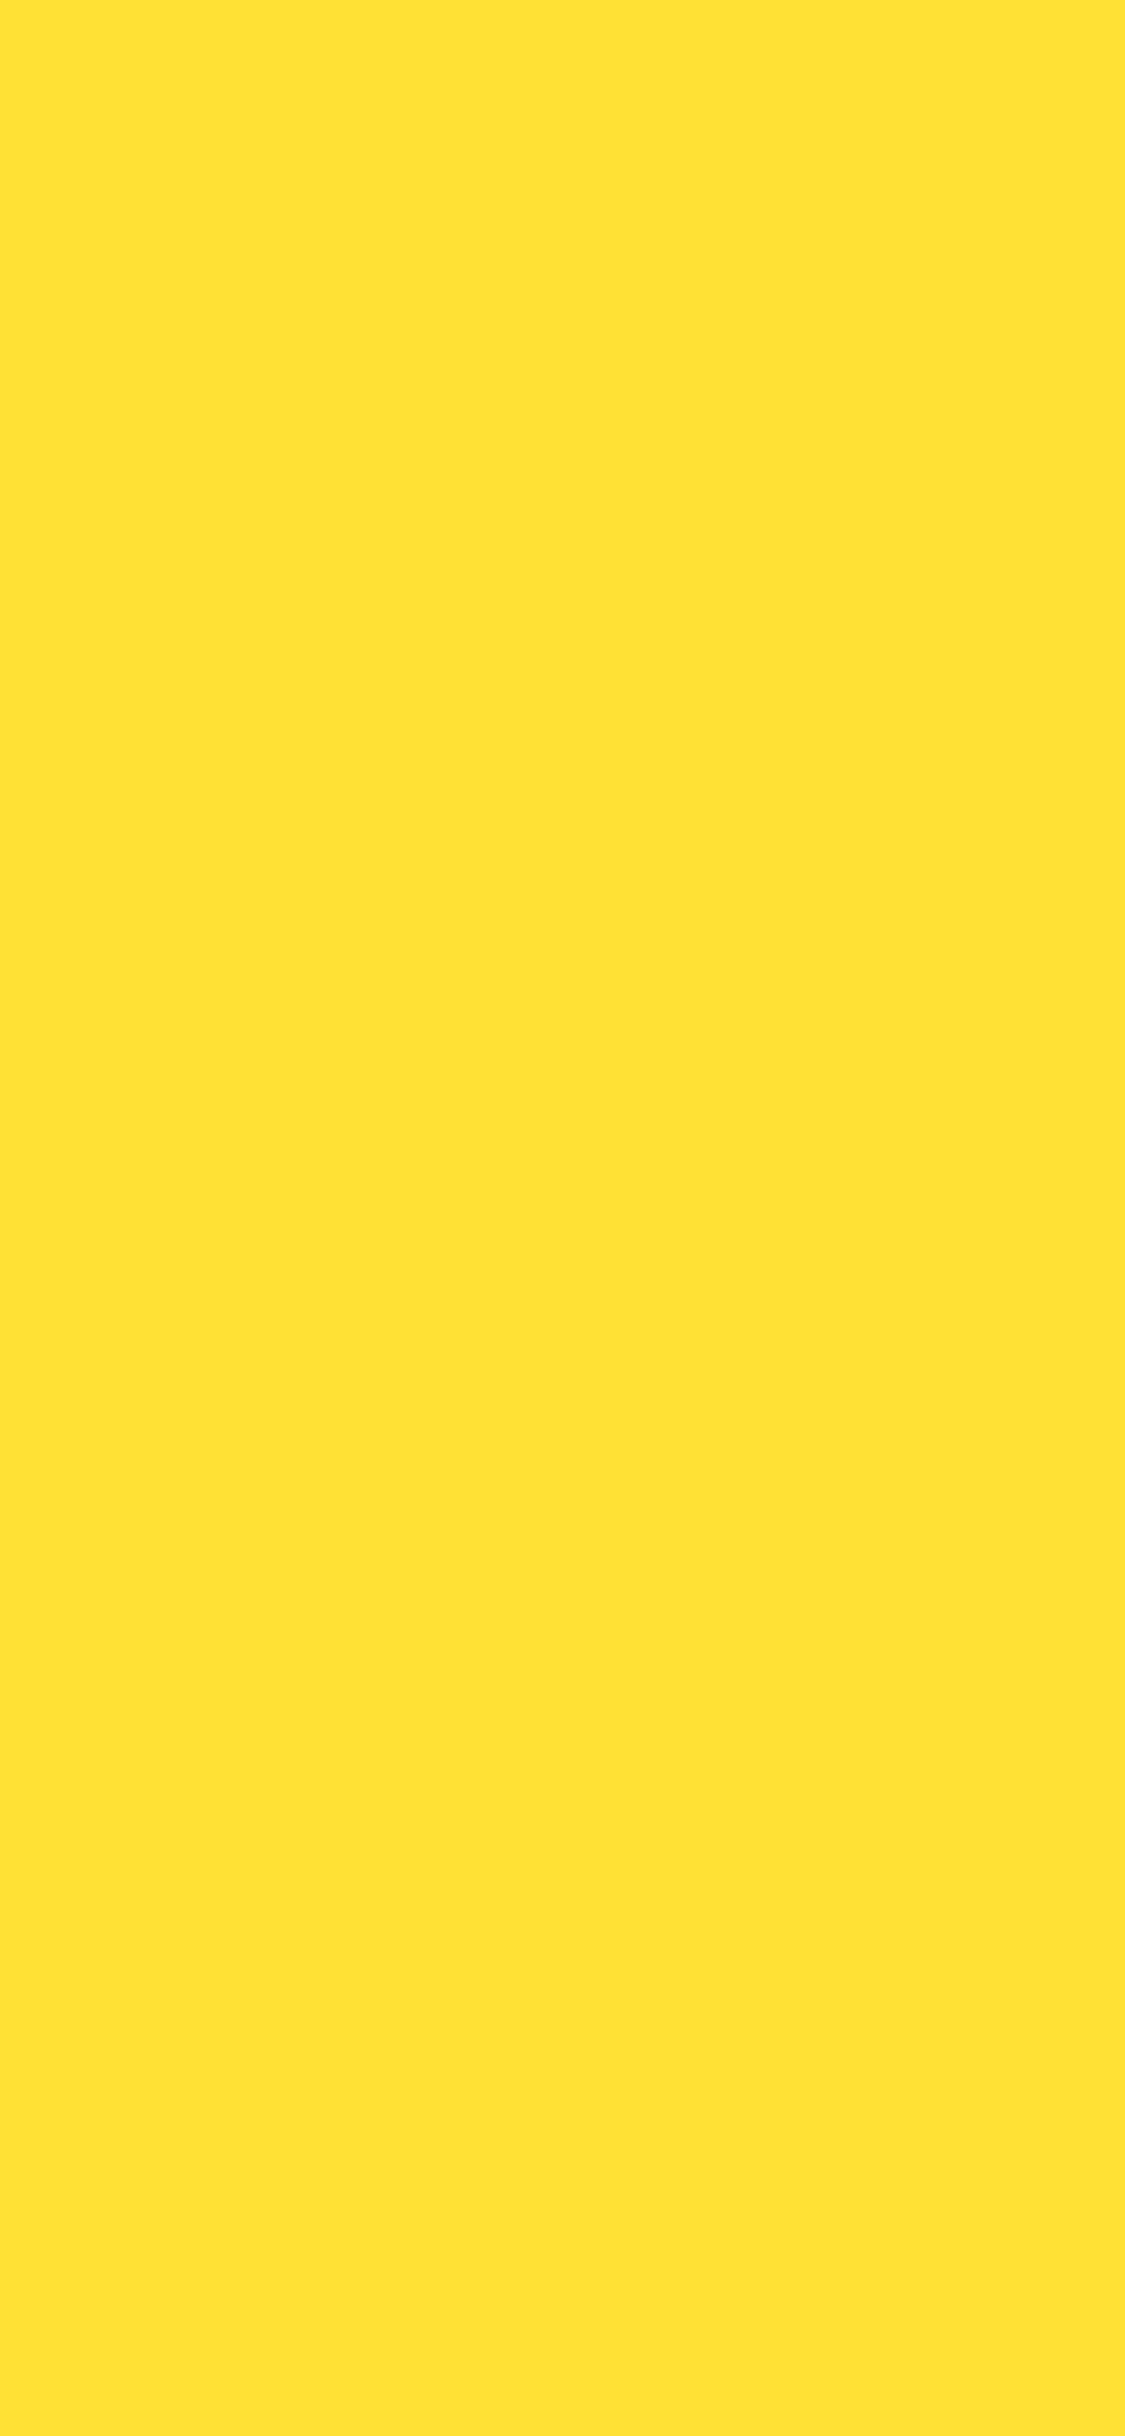 1125x2436 Banana Yellow Solid Color Background